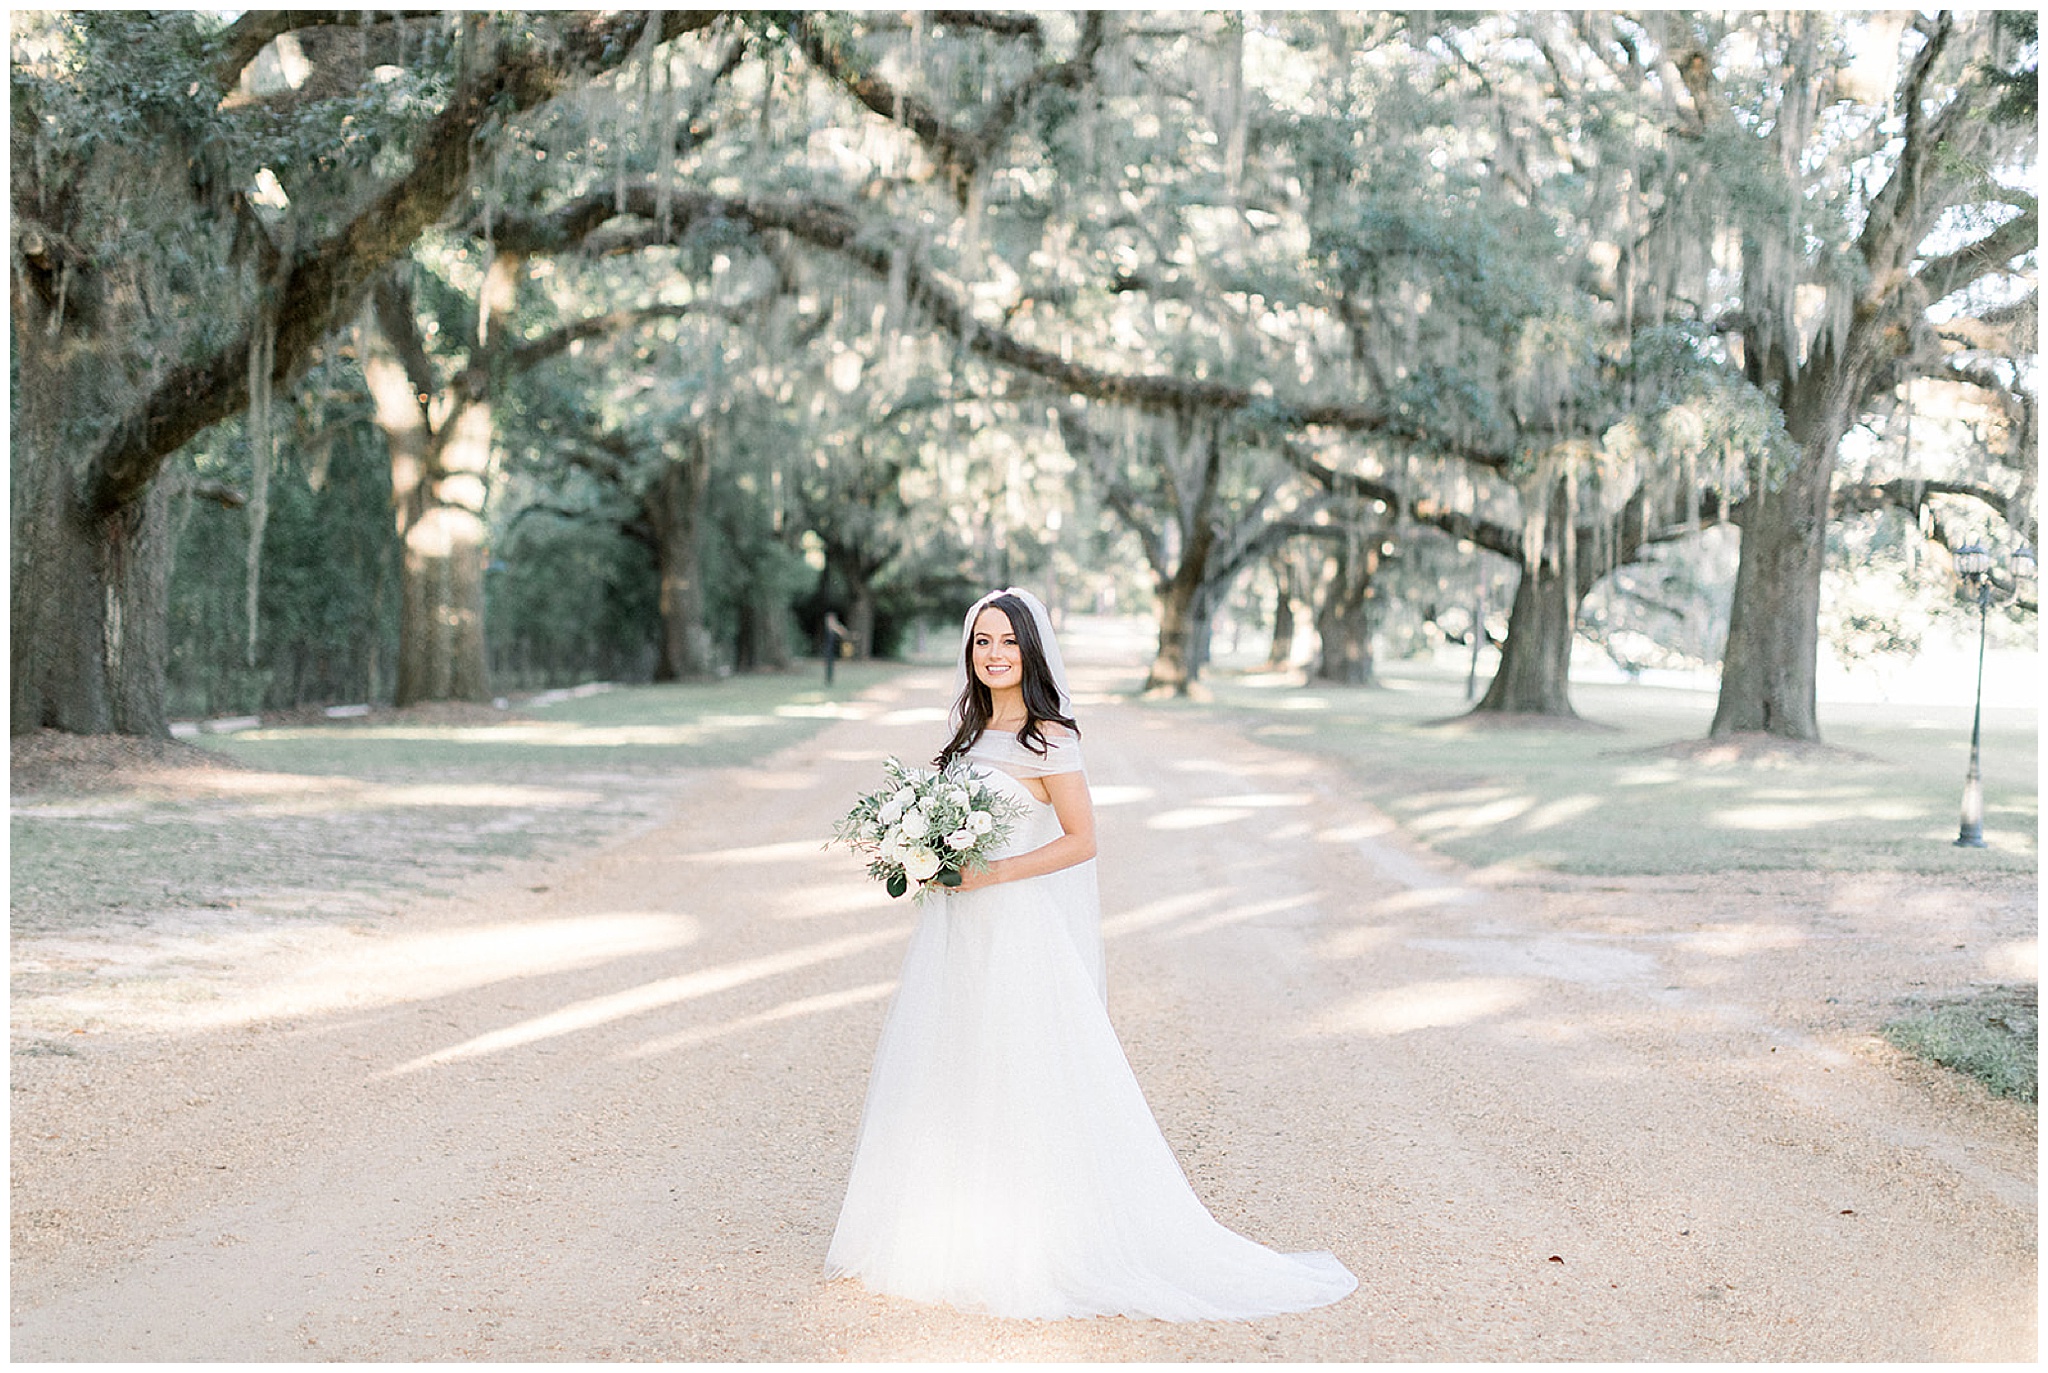 A bride in a white tule dress holds her white flower bouquet on an unpaved road lined with oak trees covered in moss